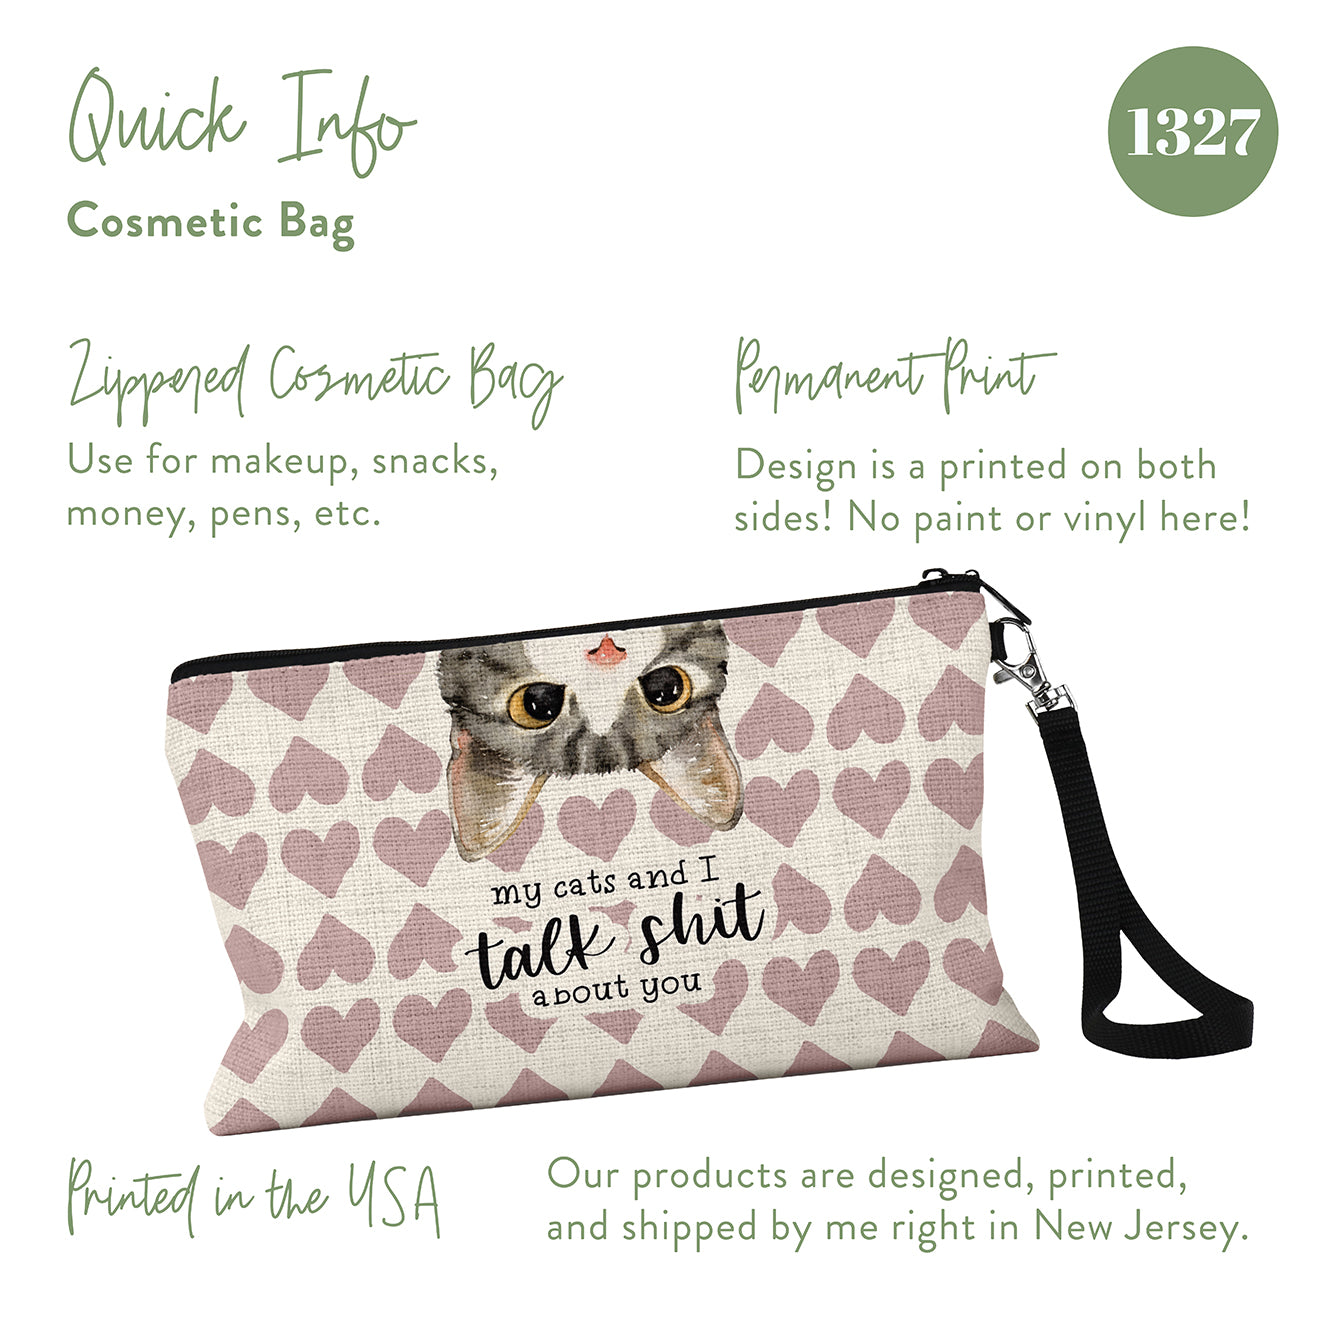 My Cats and I Talk Shit About You Cosmetic Bag